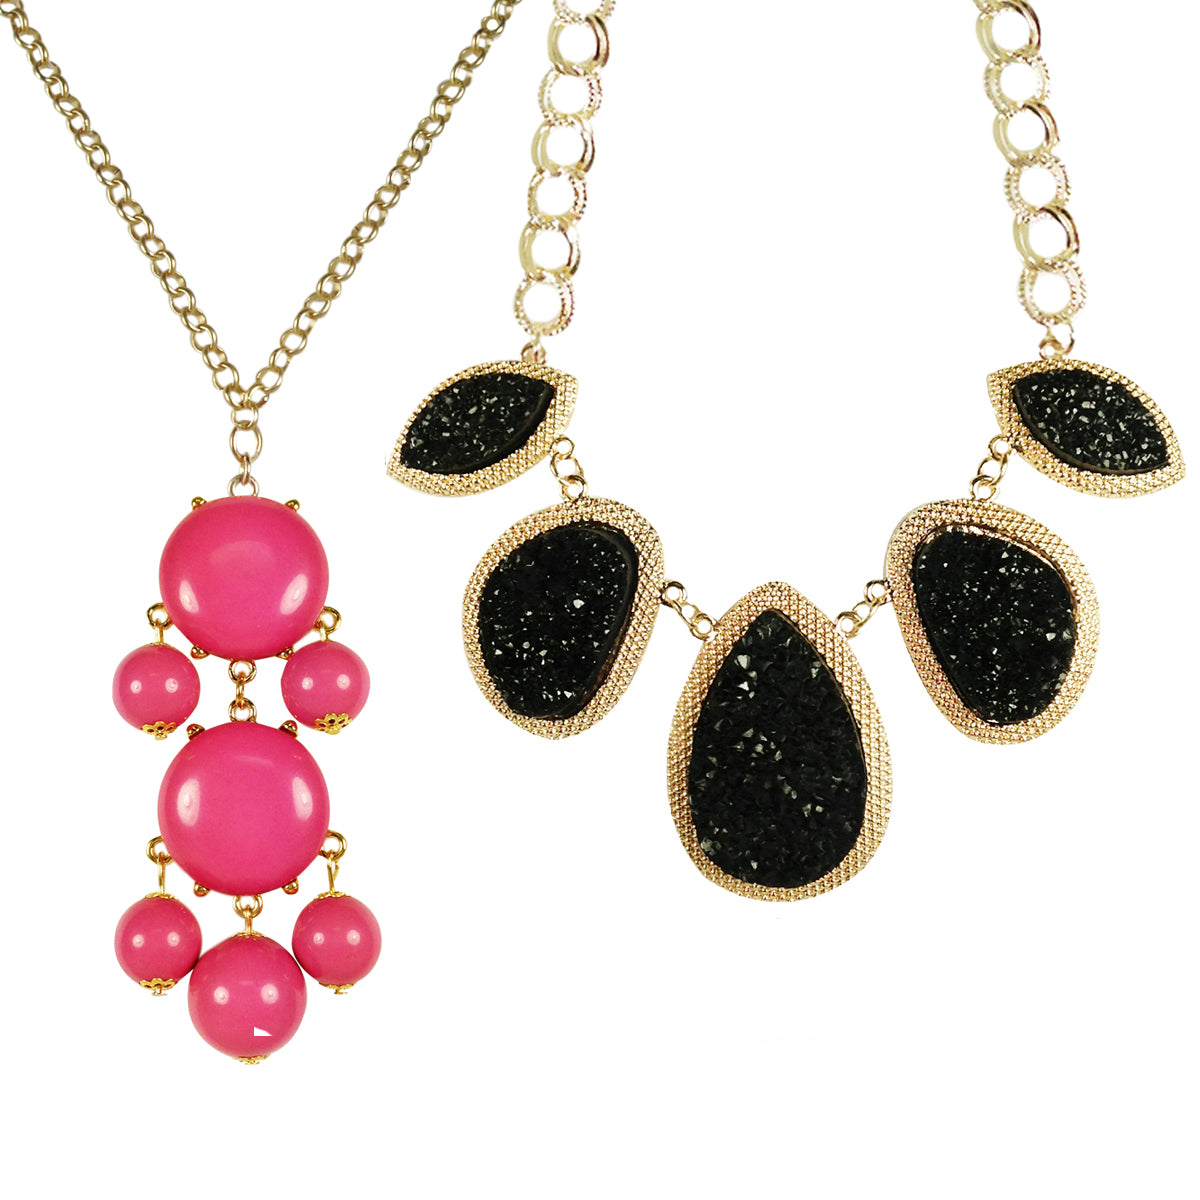 Hot Pink Beaded Bubble Pendant Necklace + Stone Necklace